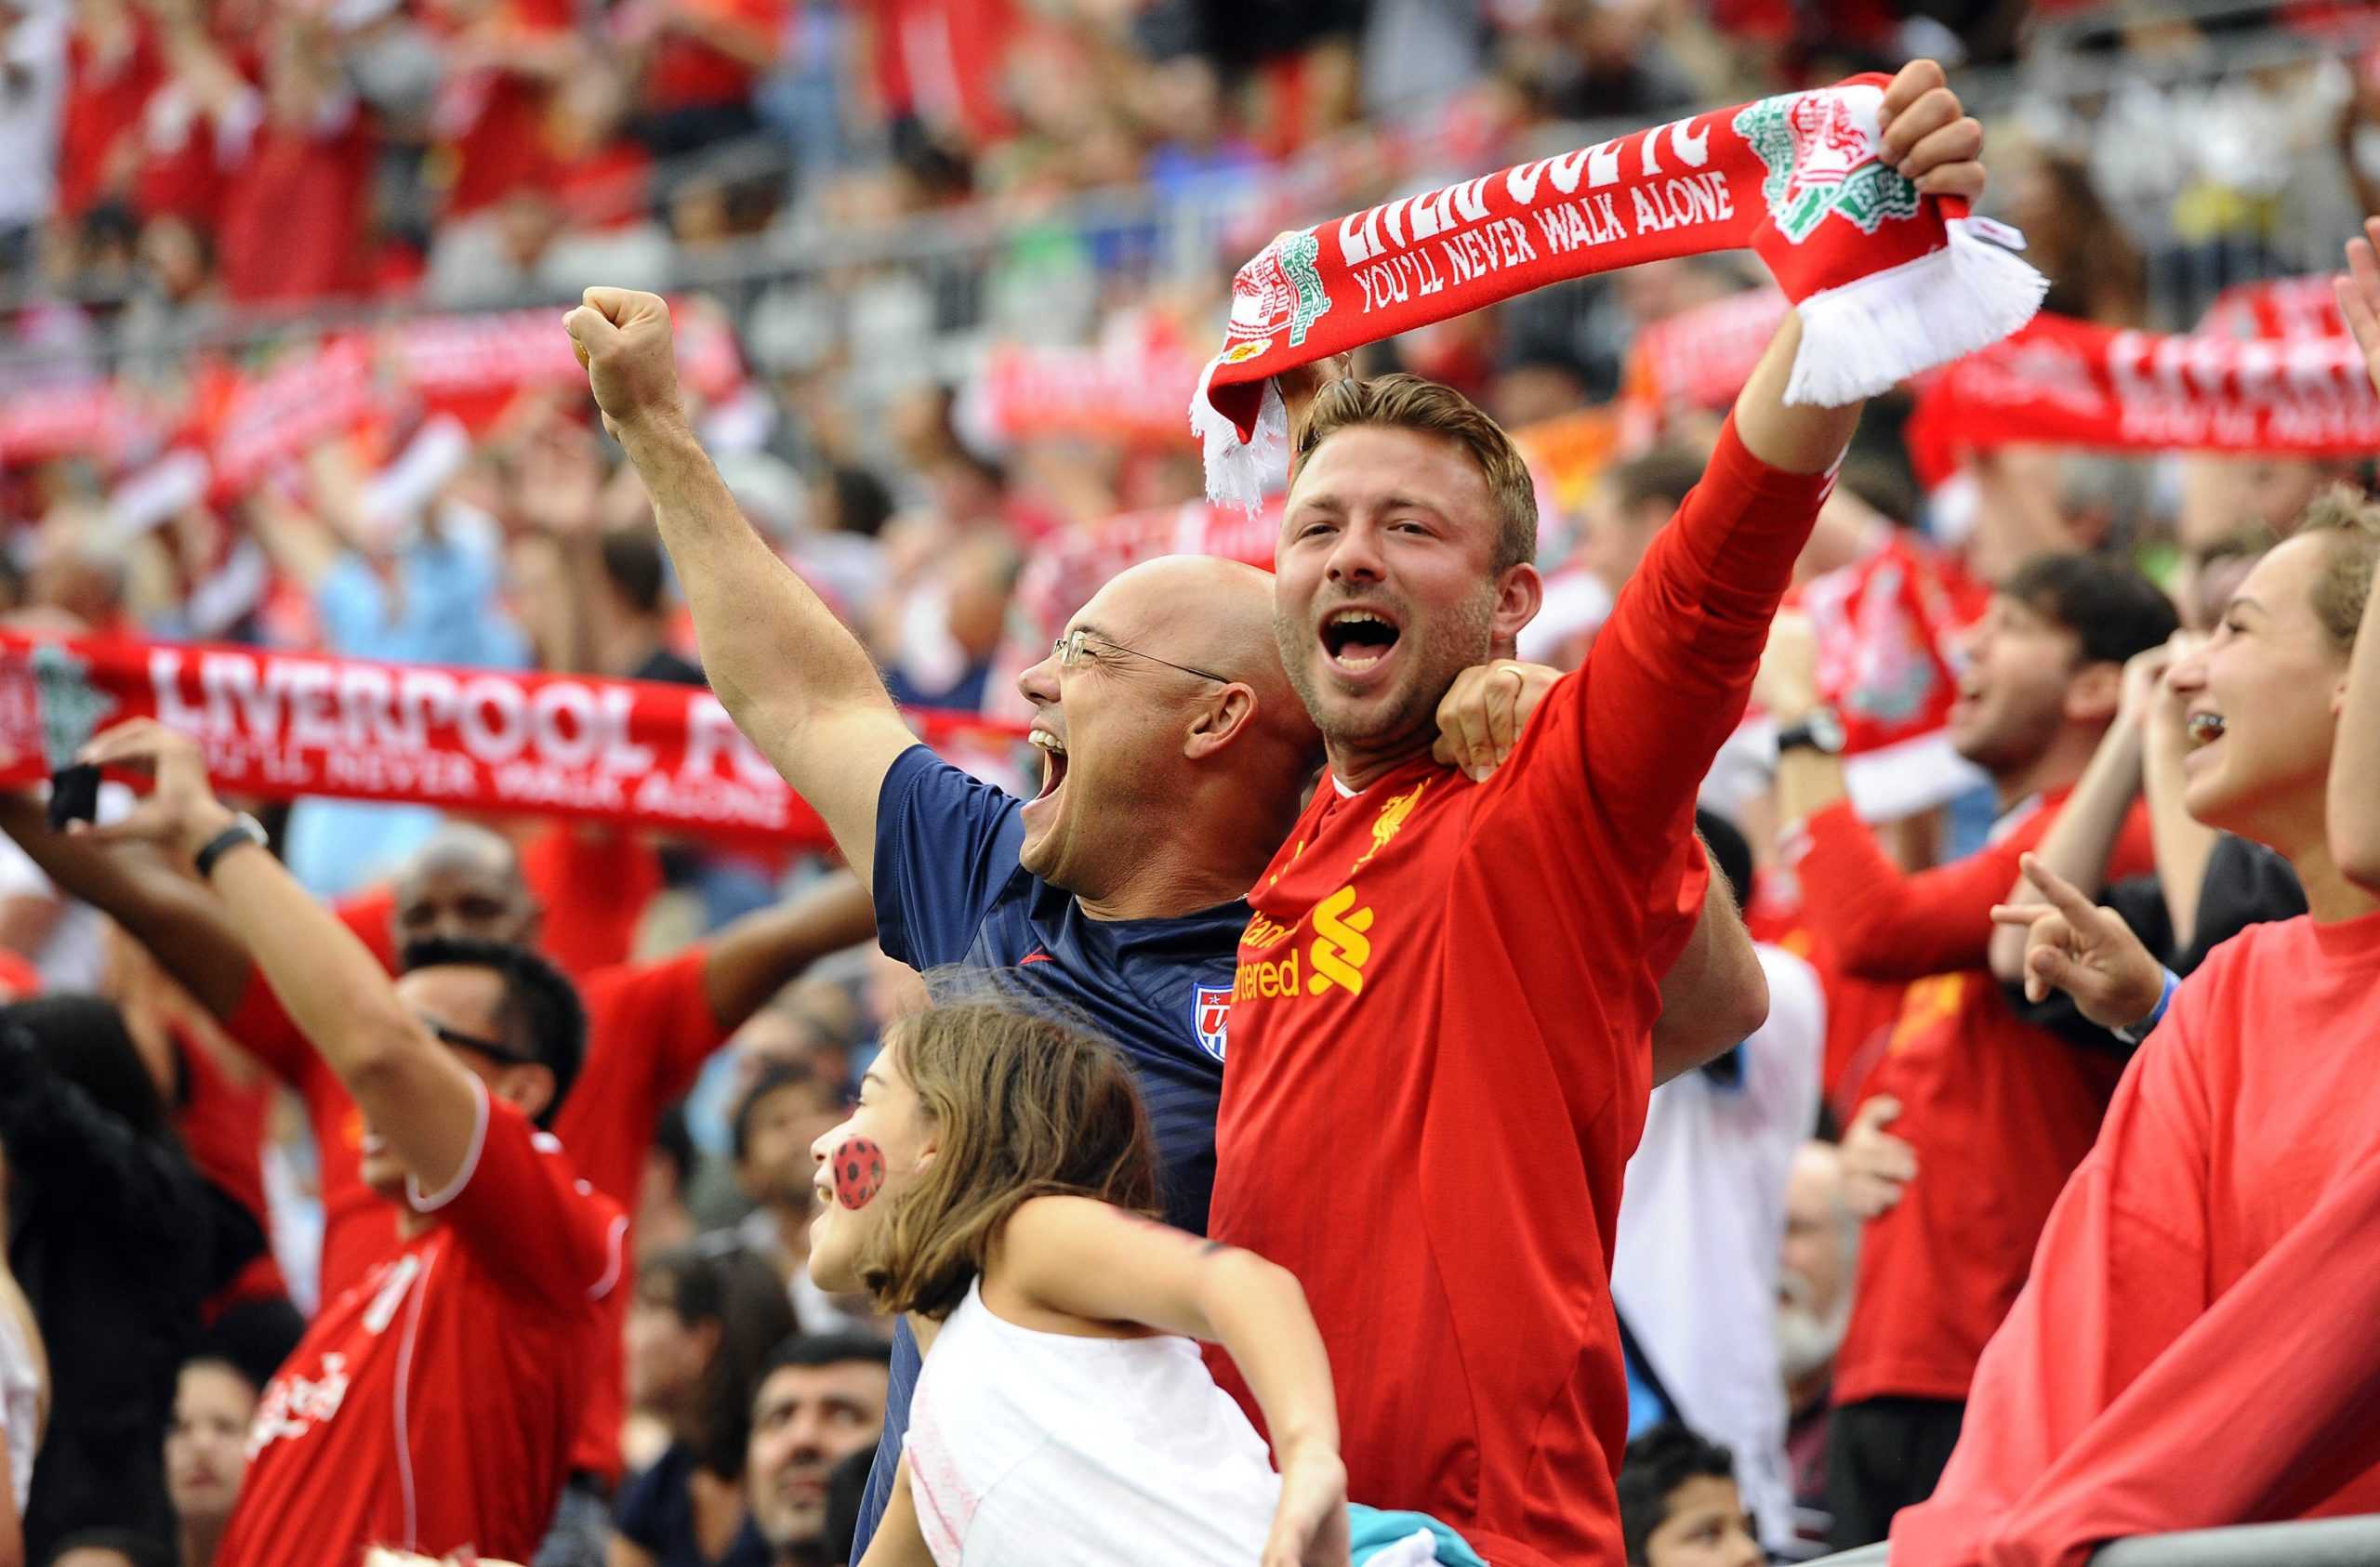 Liverpool fans stand and cheer during action against AC Milan in the semifinals of the International Champions Cup at Bank of America Stadium in Charlotte, N.C., on Saturday, Aug. 2, 2014. Liverpool won, 2-0. (David T. Foster, III/Charlotte Observer/MCT)